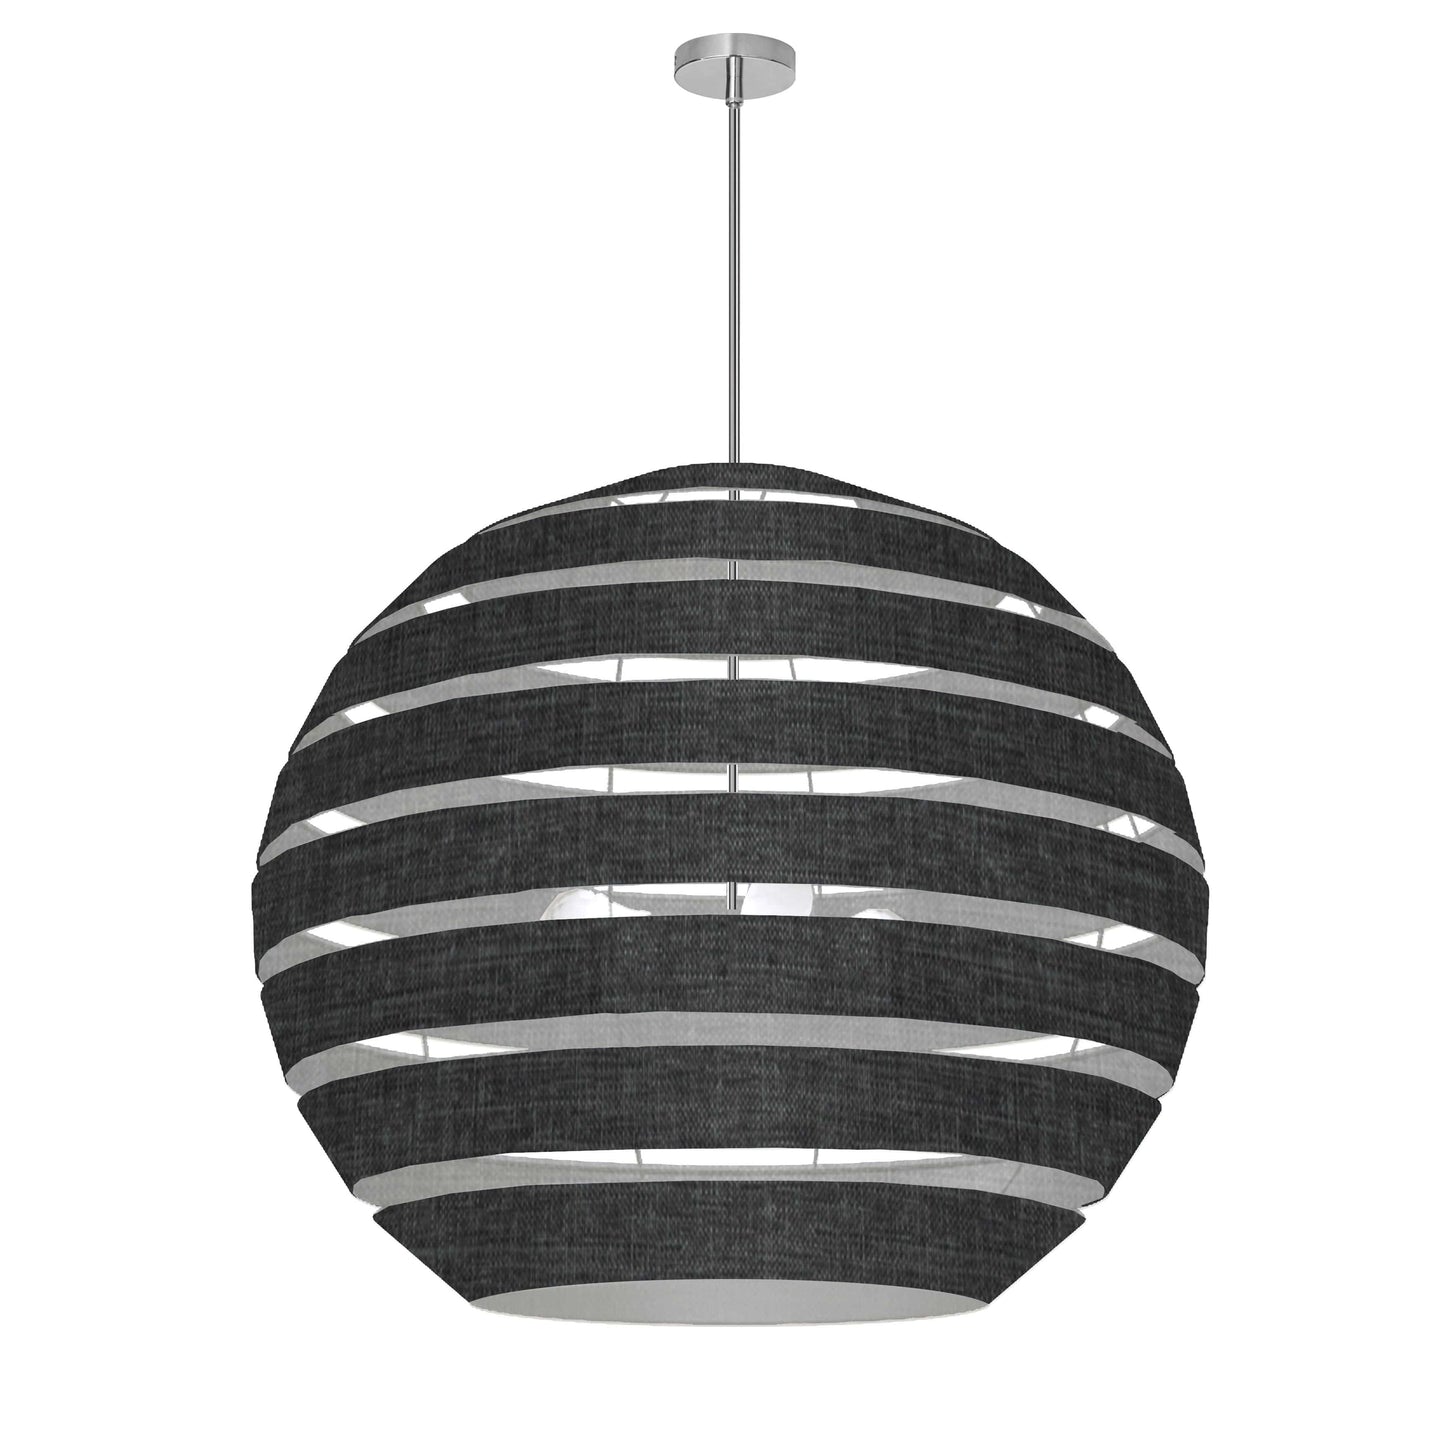 Dainolite Hula 4 Light 30 in Polished Chrome Incandescent Chandelier with Black and Clear Shade